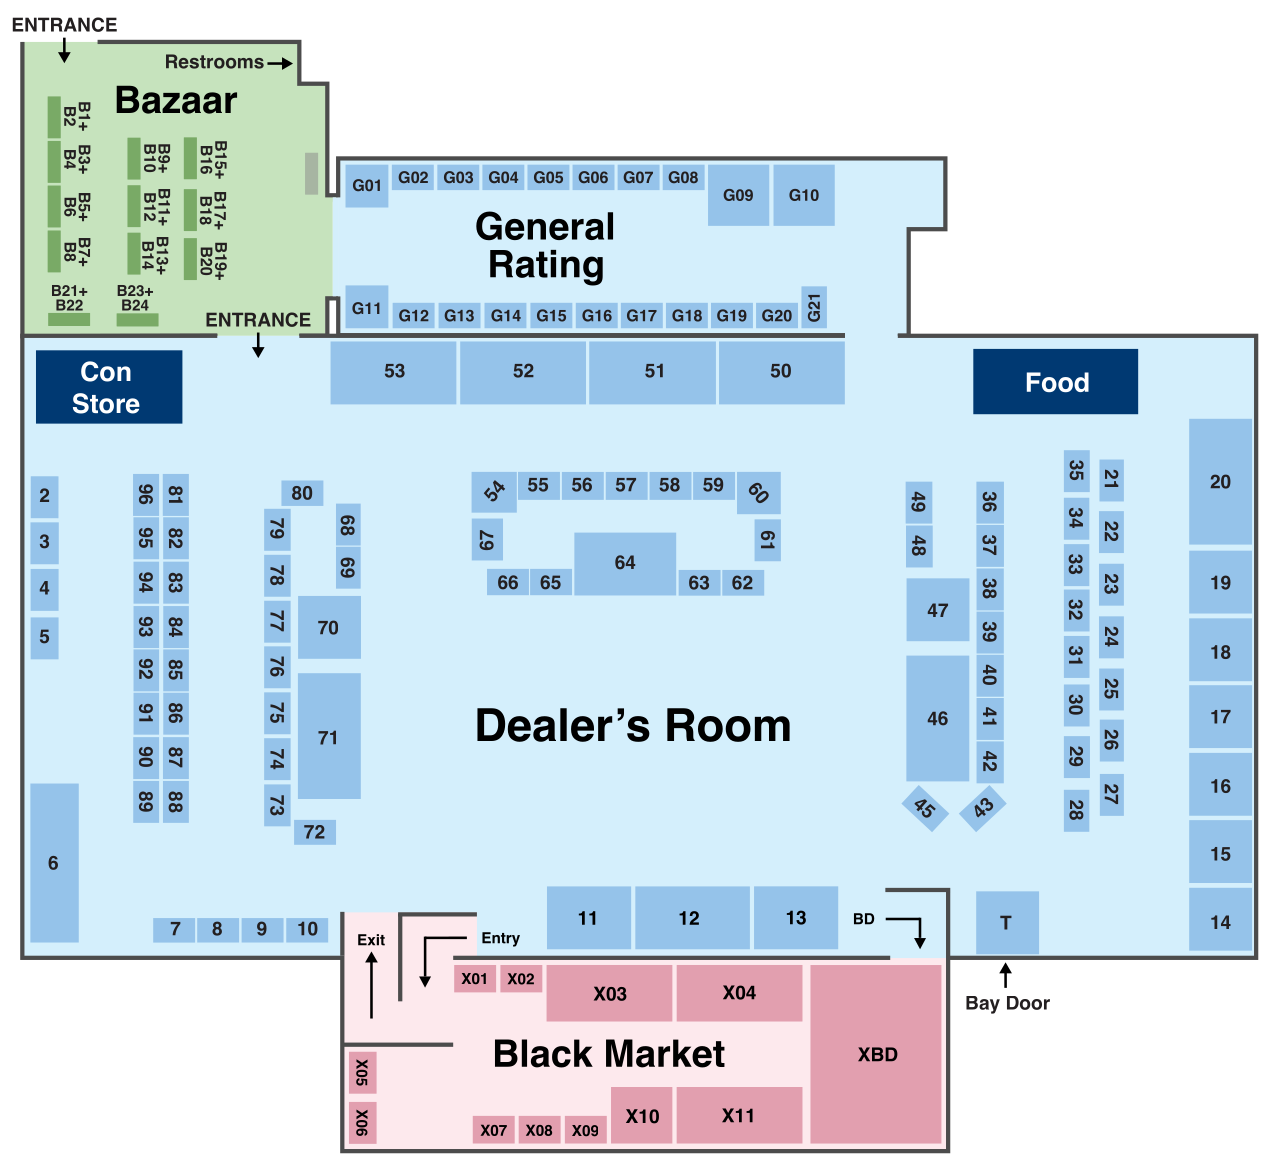 Map of the Dealers Den, Bazaar, General Rating area and Black Market, with tables and booths numbered.